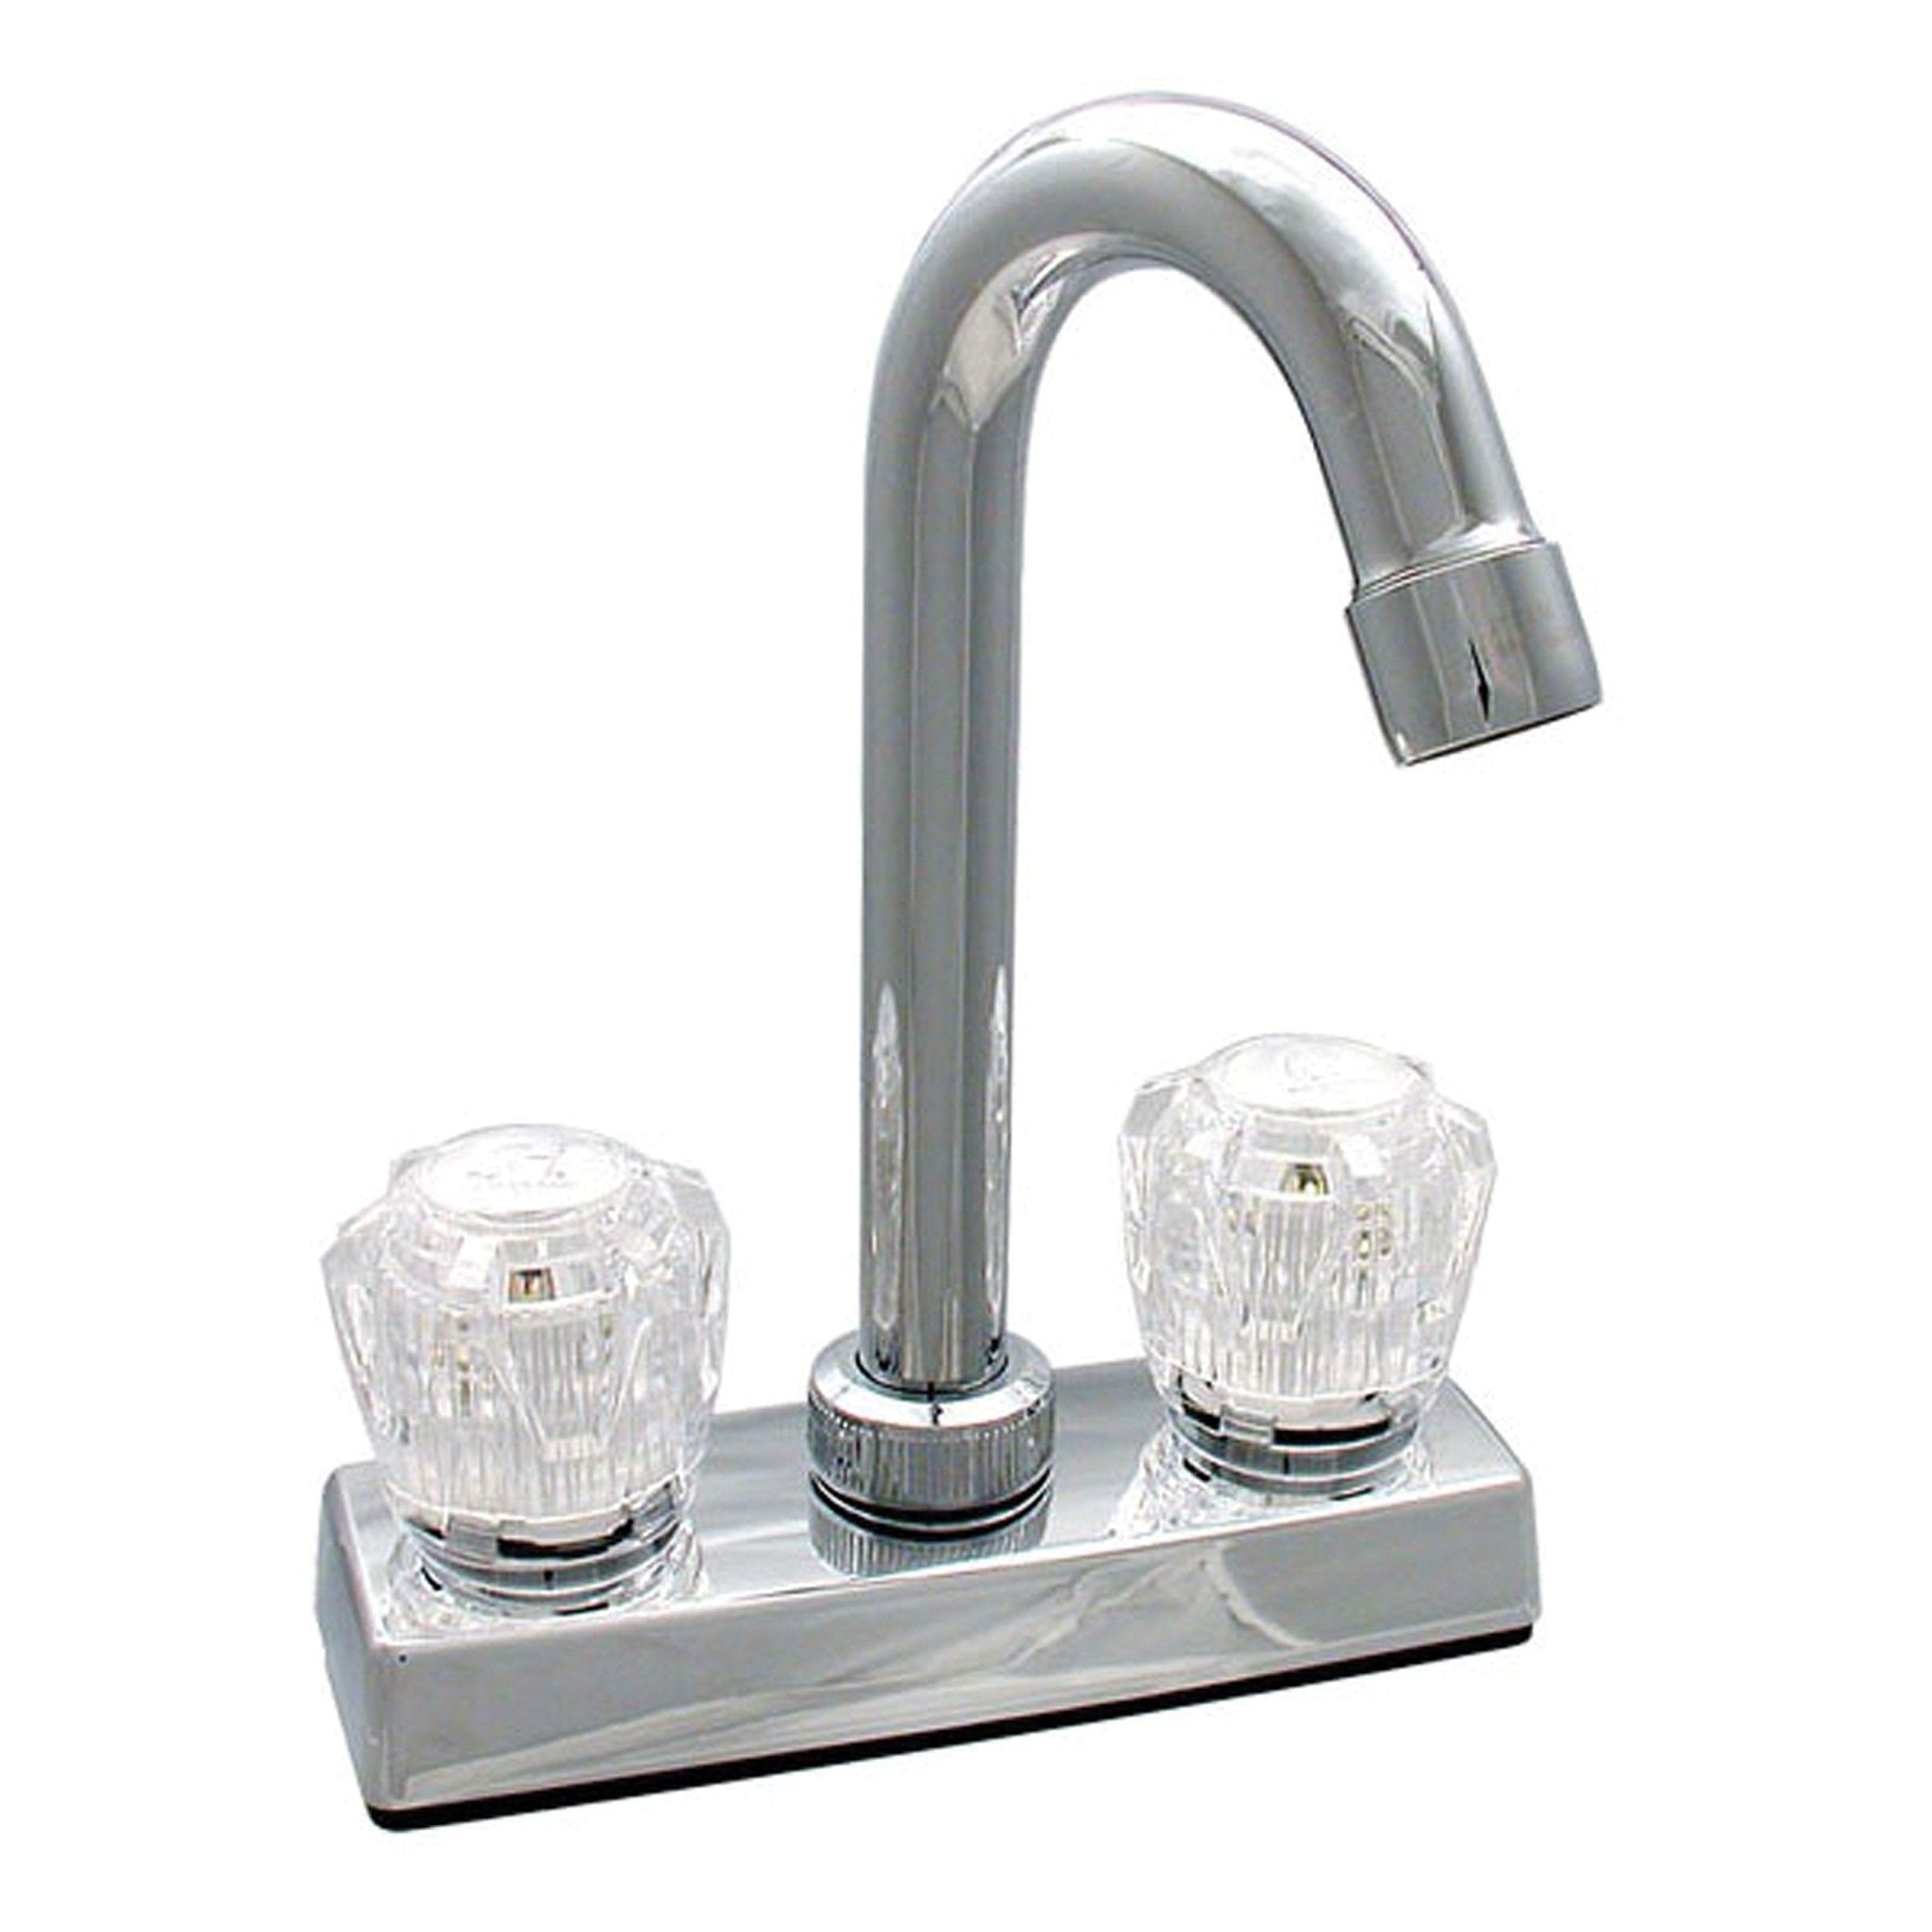 Phoenix Products | PF211310 | Kitchen Faucet Chrome Plated 4 Inch Bar Deck